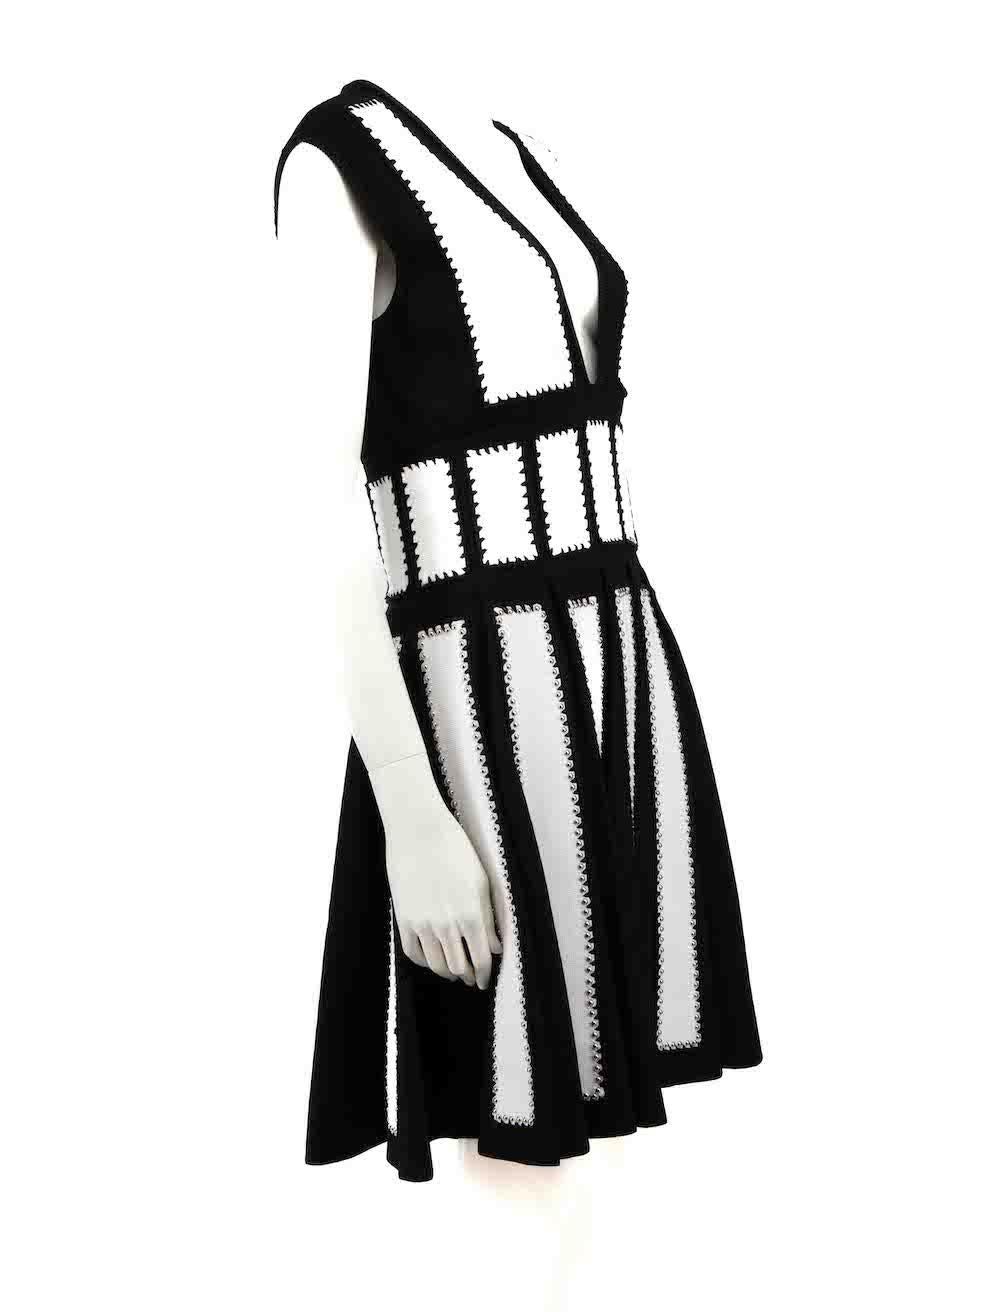 CONDITION is Very good. Hardly any visible wear to dress is evident on this used Givenchy designer resale item.
 
 
 
 Details
 
 
 Black and white
 
 Viscose
 
 Knit dress
 
 Striped pattern
 
 Plunge neck
 
 Sleeveless
 
 Silver studded detail
 
